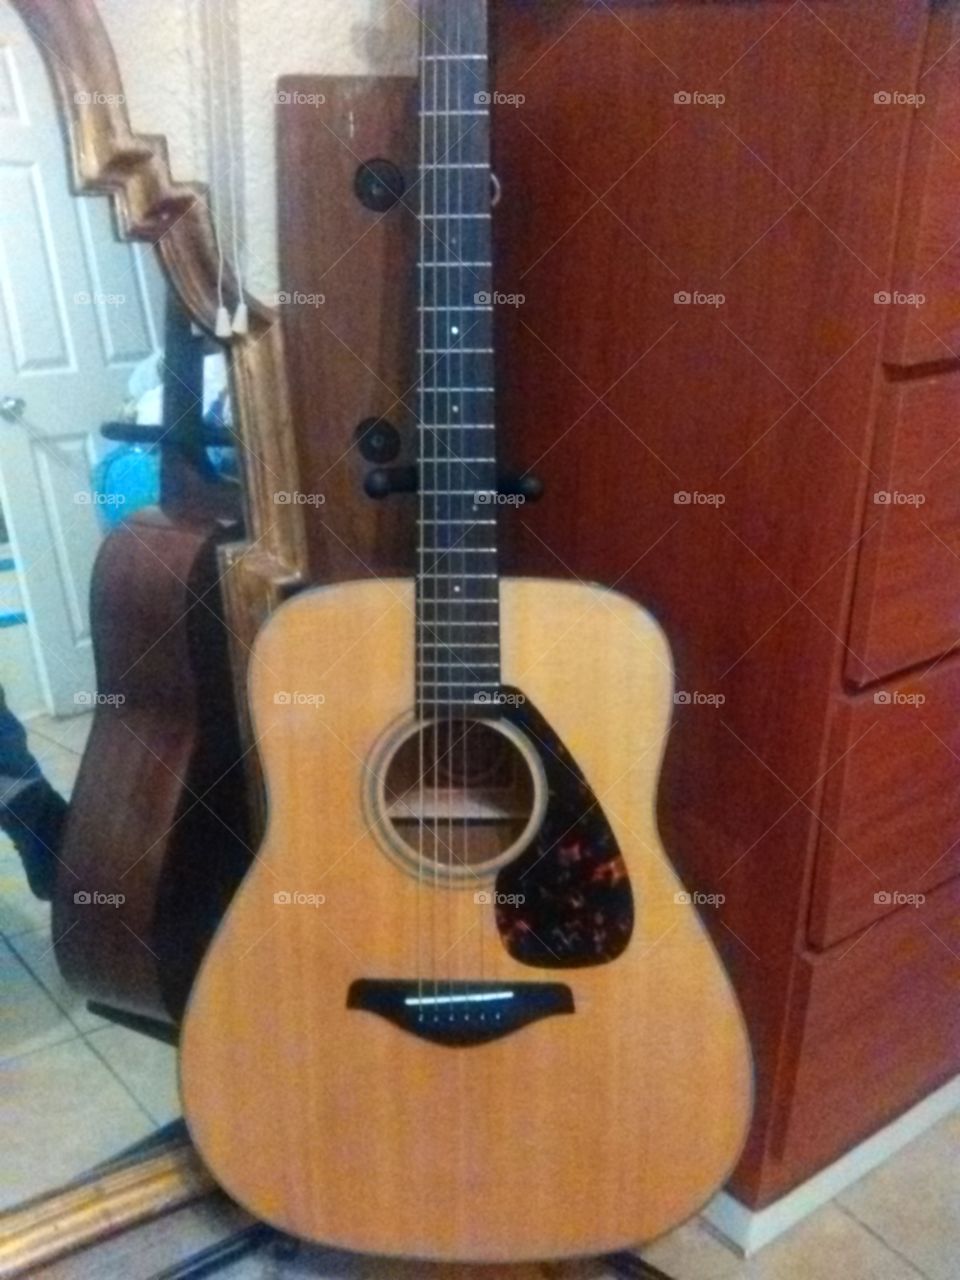 Dread Not the Dreadnought Yamaha FG700S Acoustic 6-String Guitar